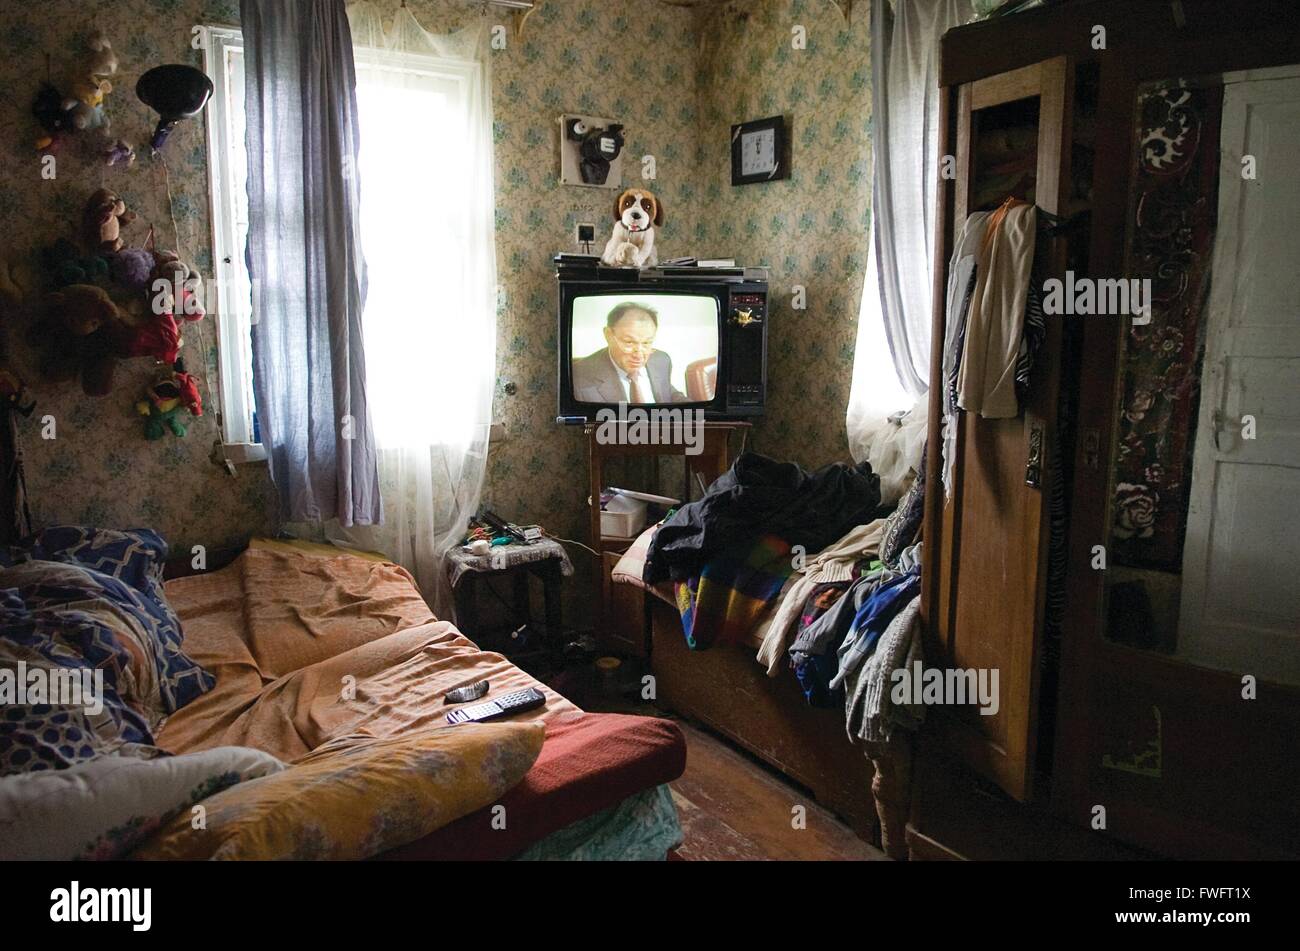 Tv set in the home of a Ukrainian family Stock Photo